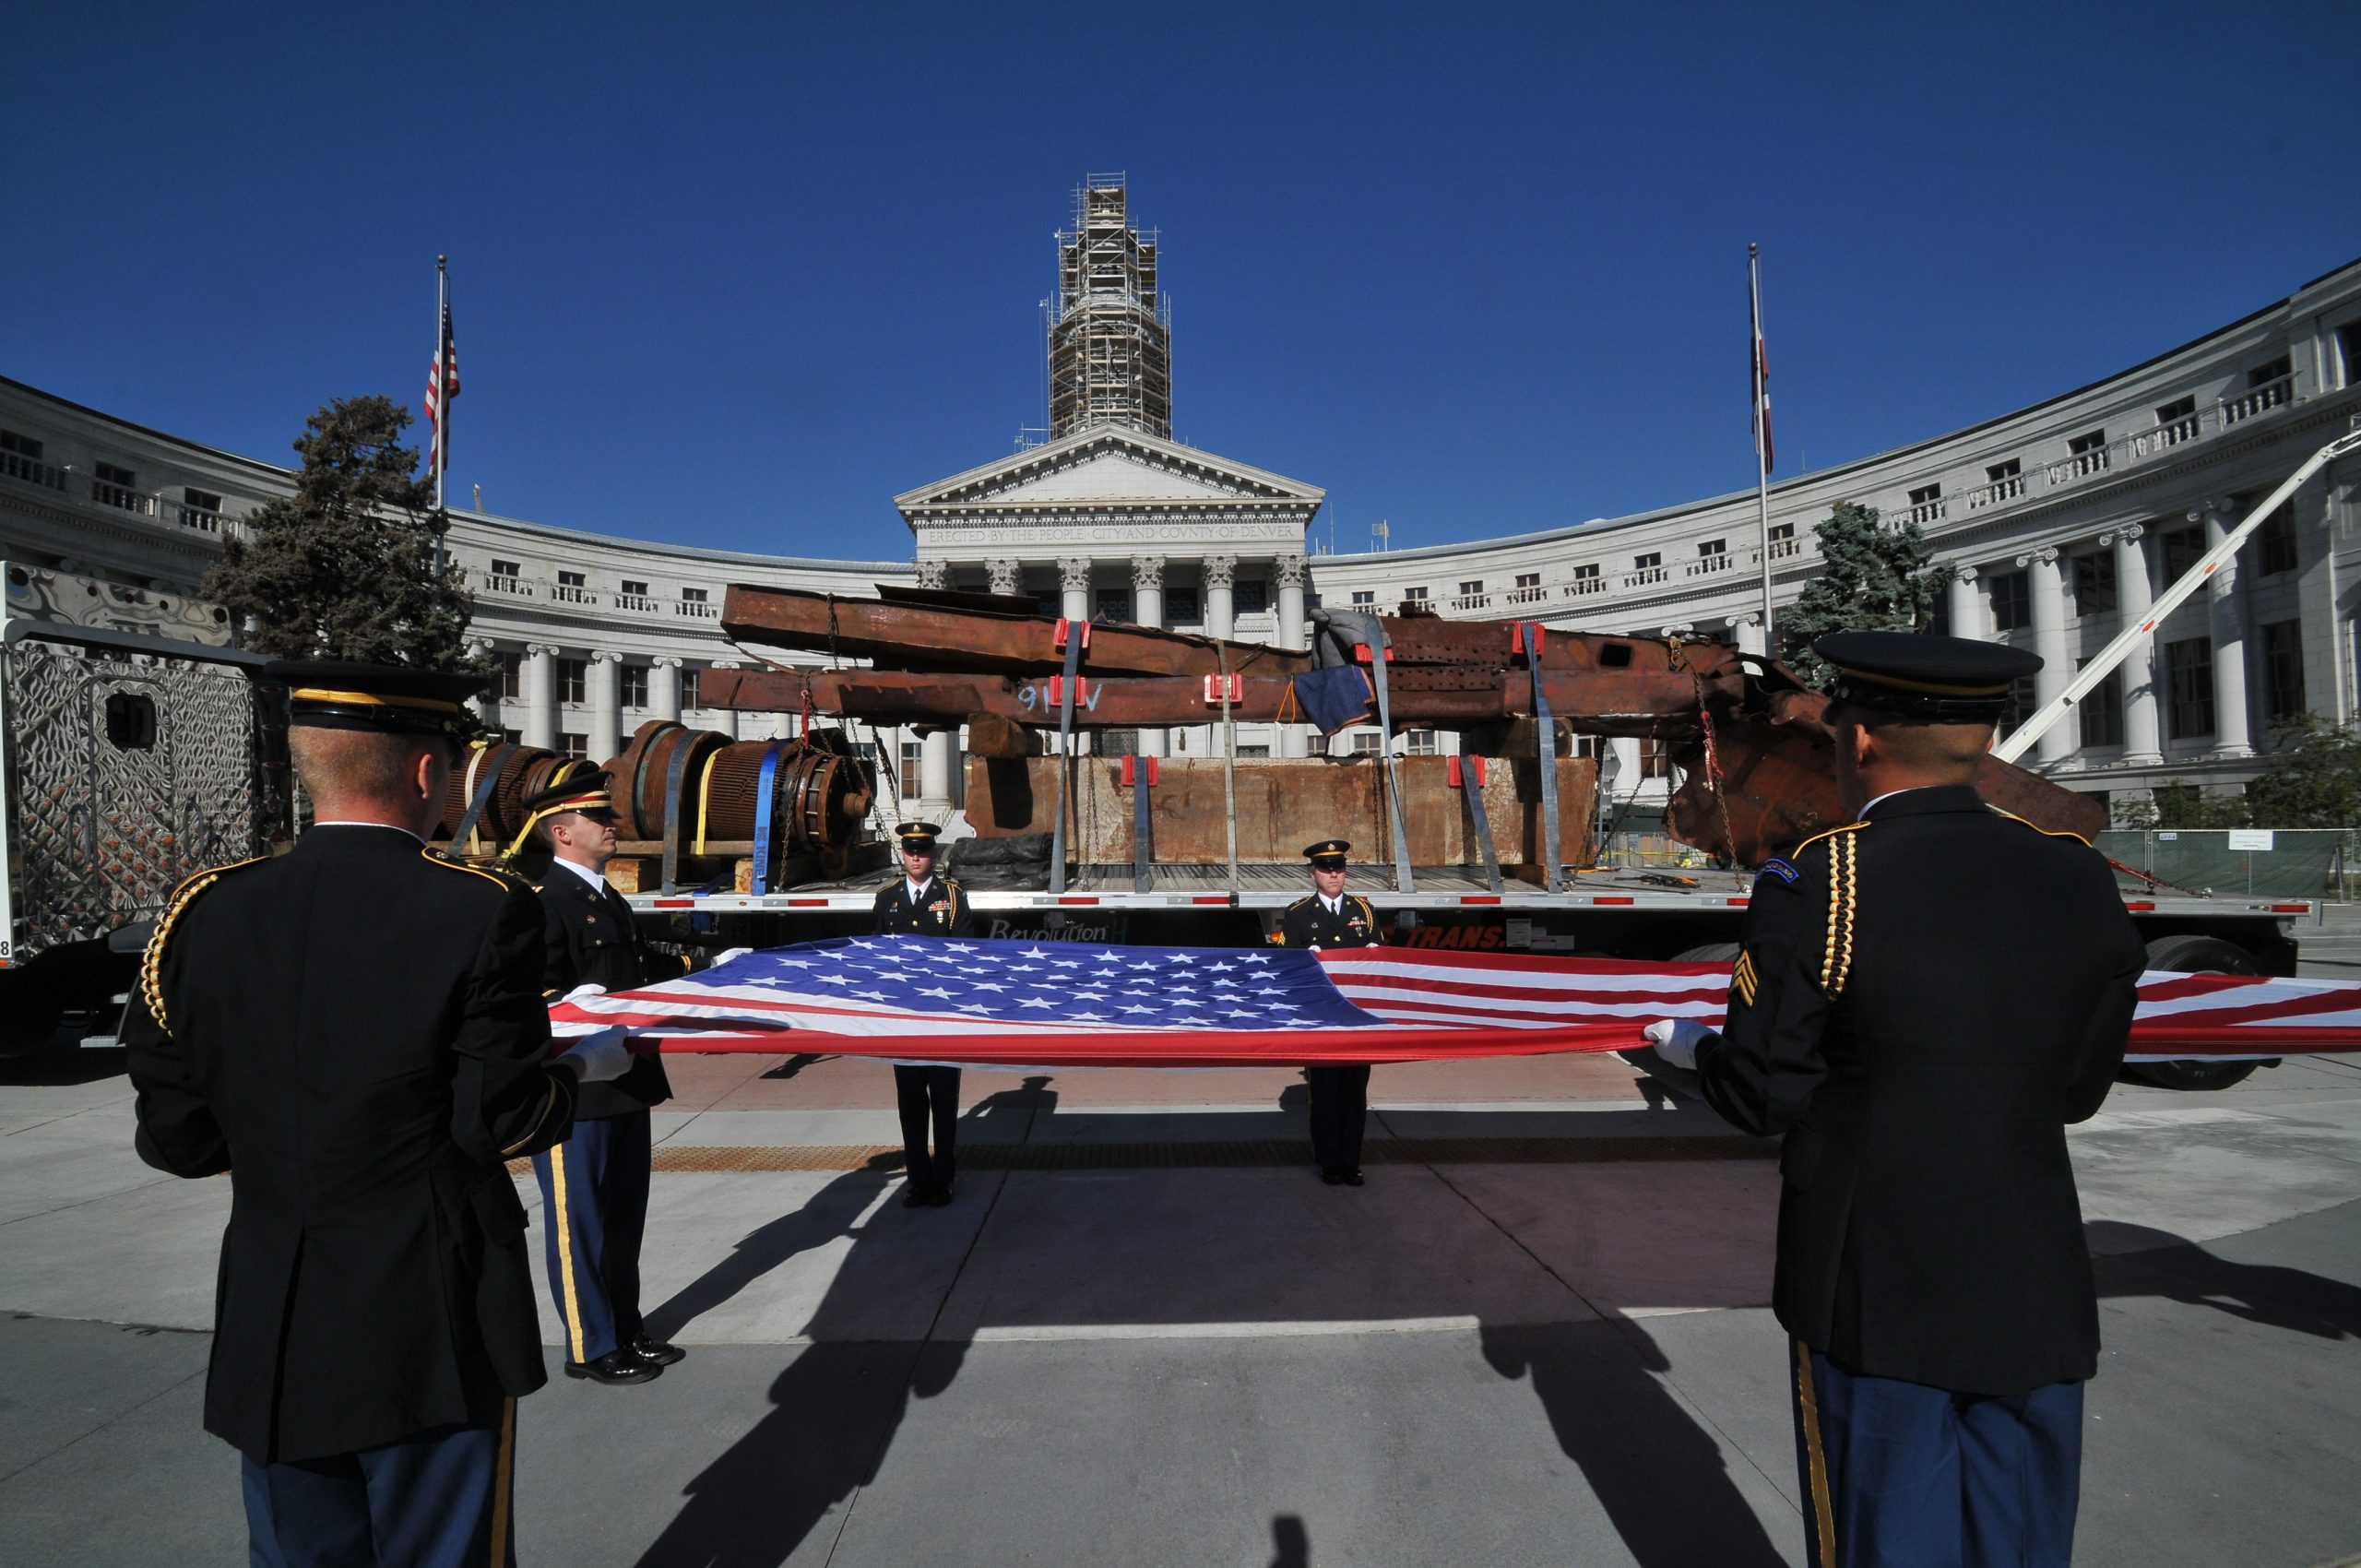 A remembrance ceremony to mark the 11th anniversary of the September 11th terrorist attacks against the United States, in Denver, Colorado, U.S., on Tuesday, September 11, 2012.